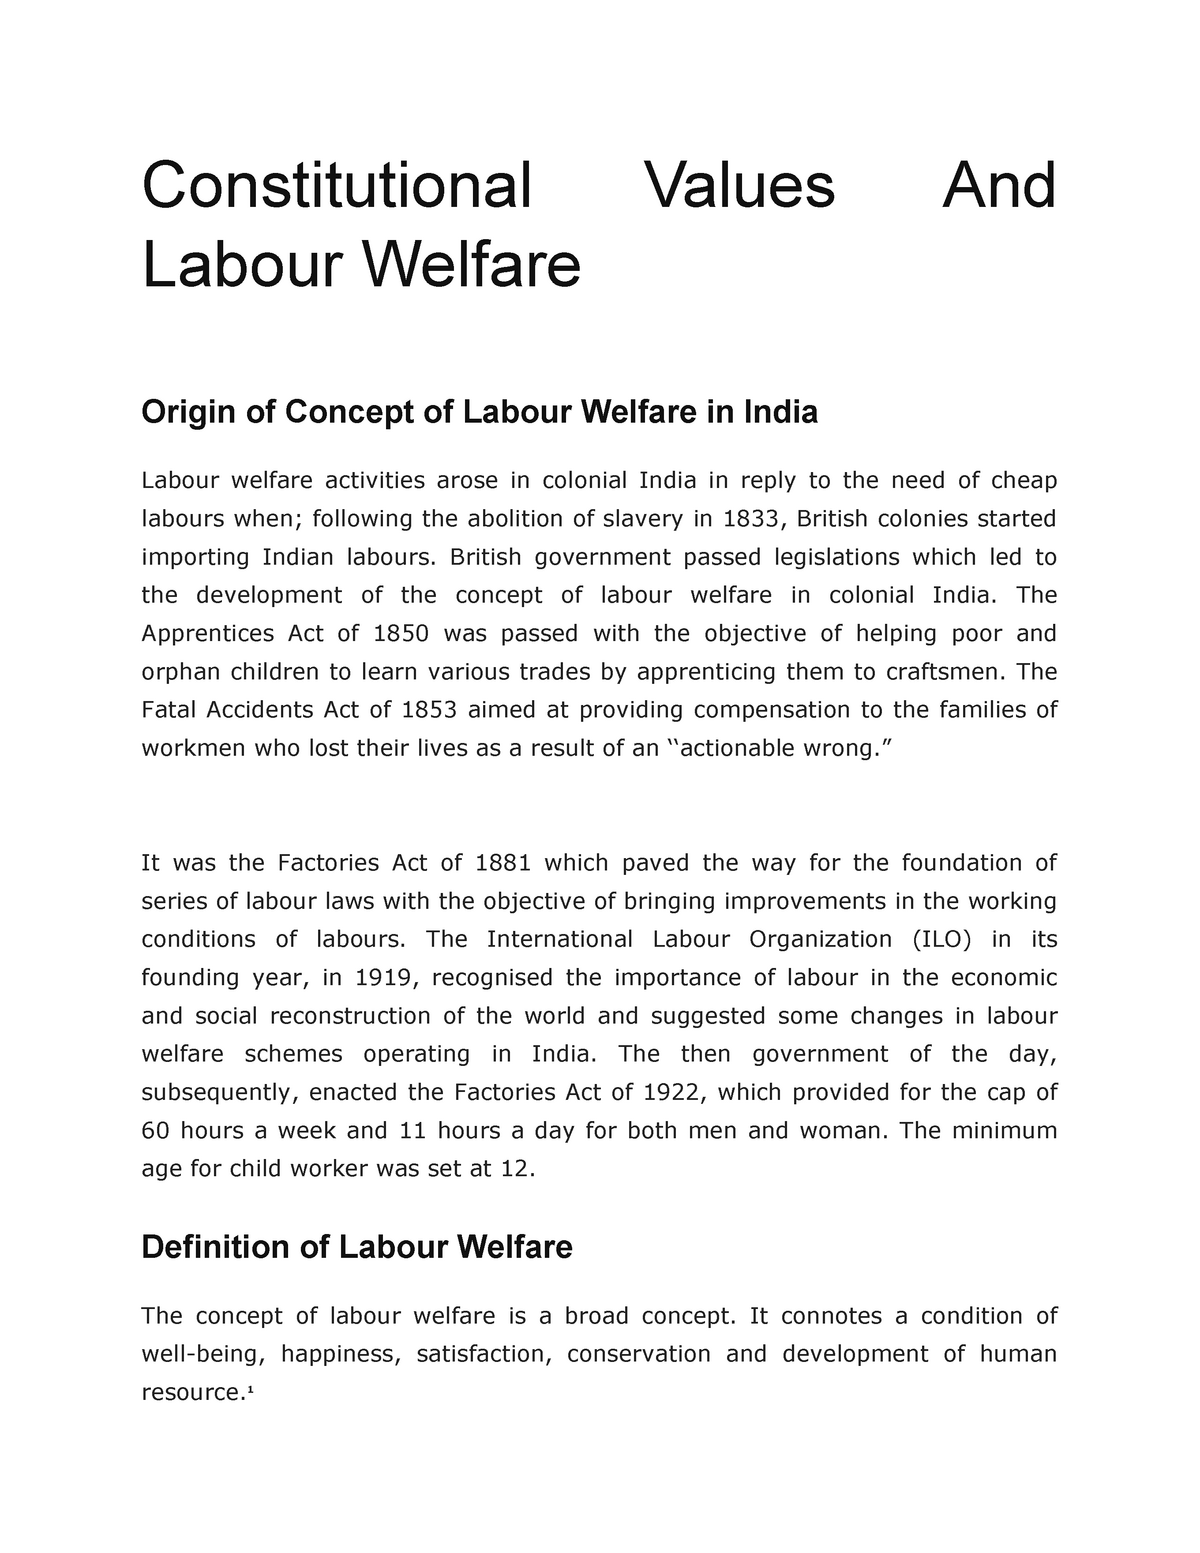 labour welfare research papers